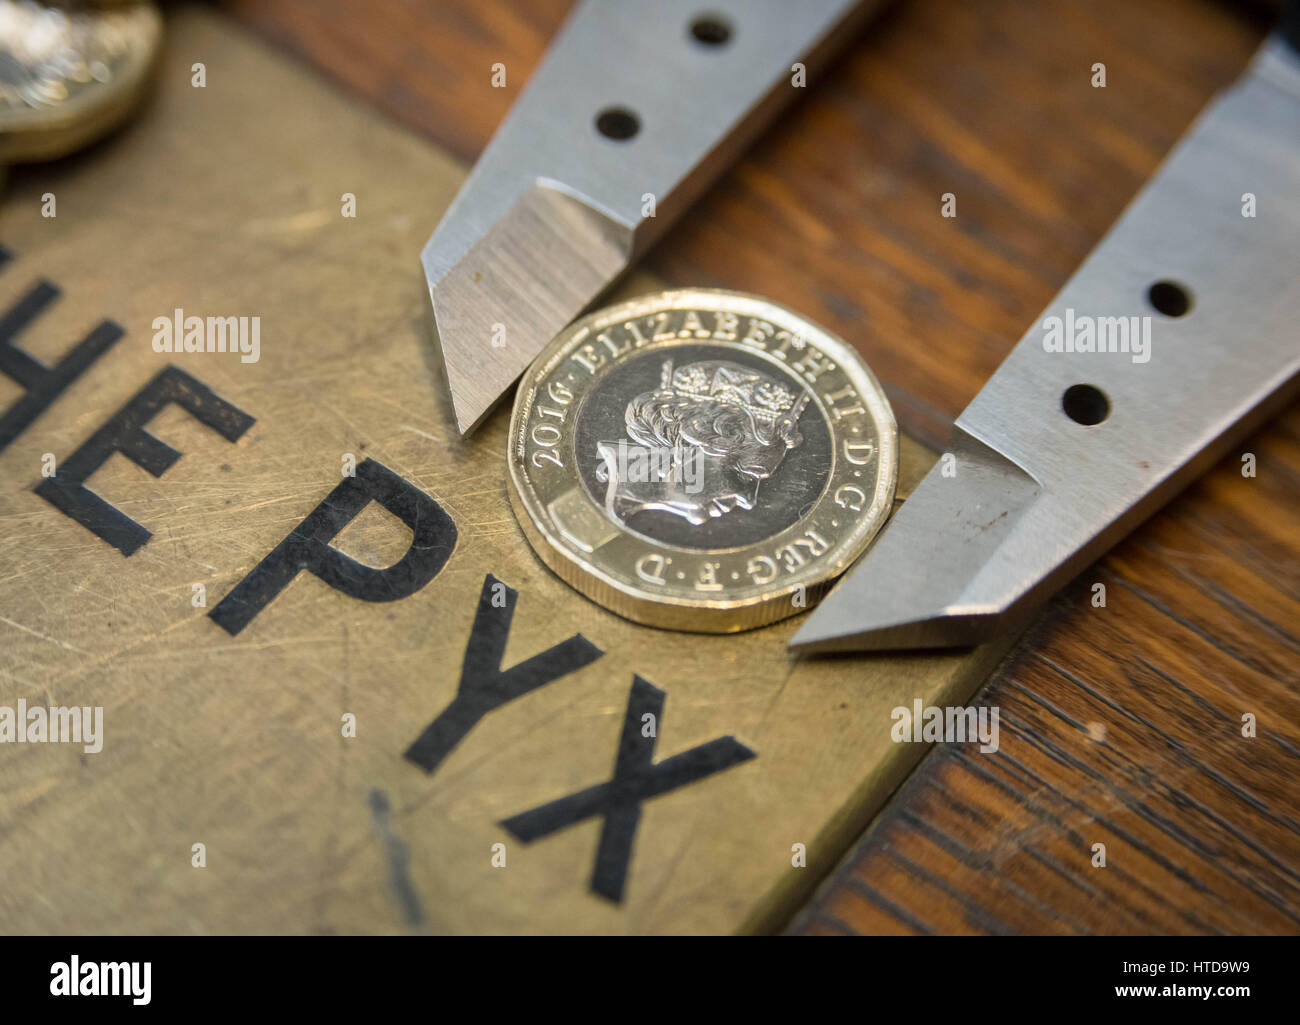 London, UK. 9th Mar, 2017. New £1 coins tested in the London Assay office ahead of their release 28th March, 2017. Pictured: In the Assay office, new £1 coins on the Pyx box, awaiting their trial. The Coins are the Realm are tested by diameter, weight and composition. Credit: Guy Corbishley/Alamy Live News Stock Photo